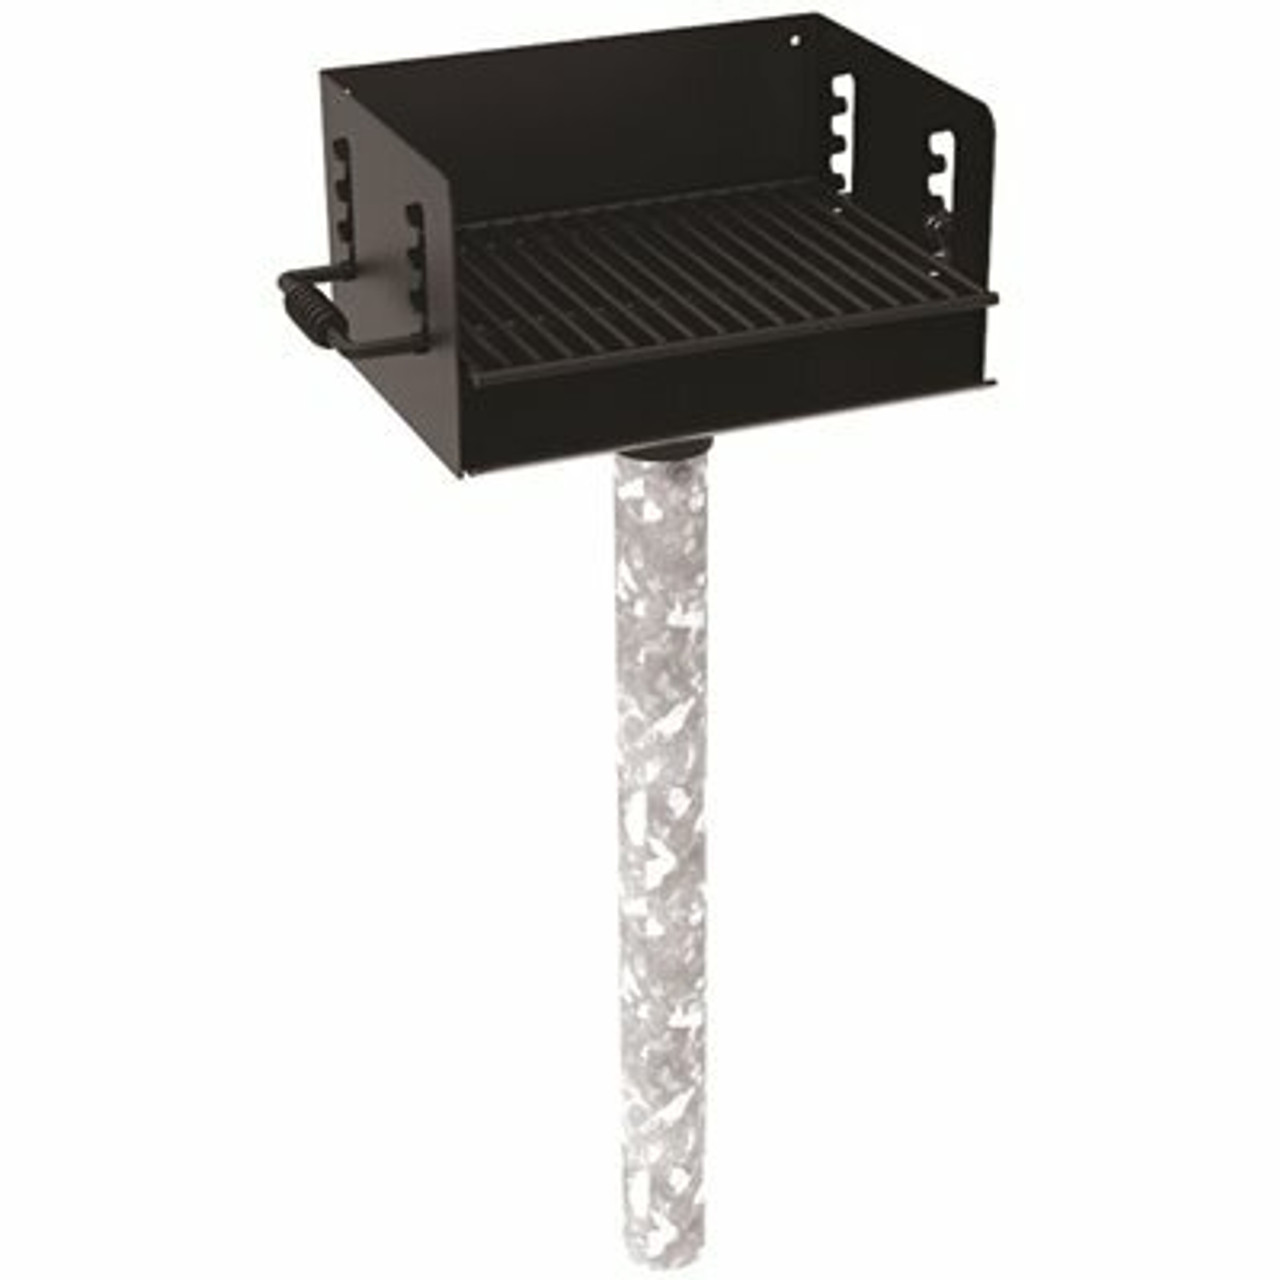 300 Sq. In. Rotating Commercial Pedestal Grill With In-Ground Mount Post In Black